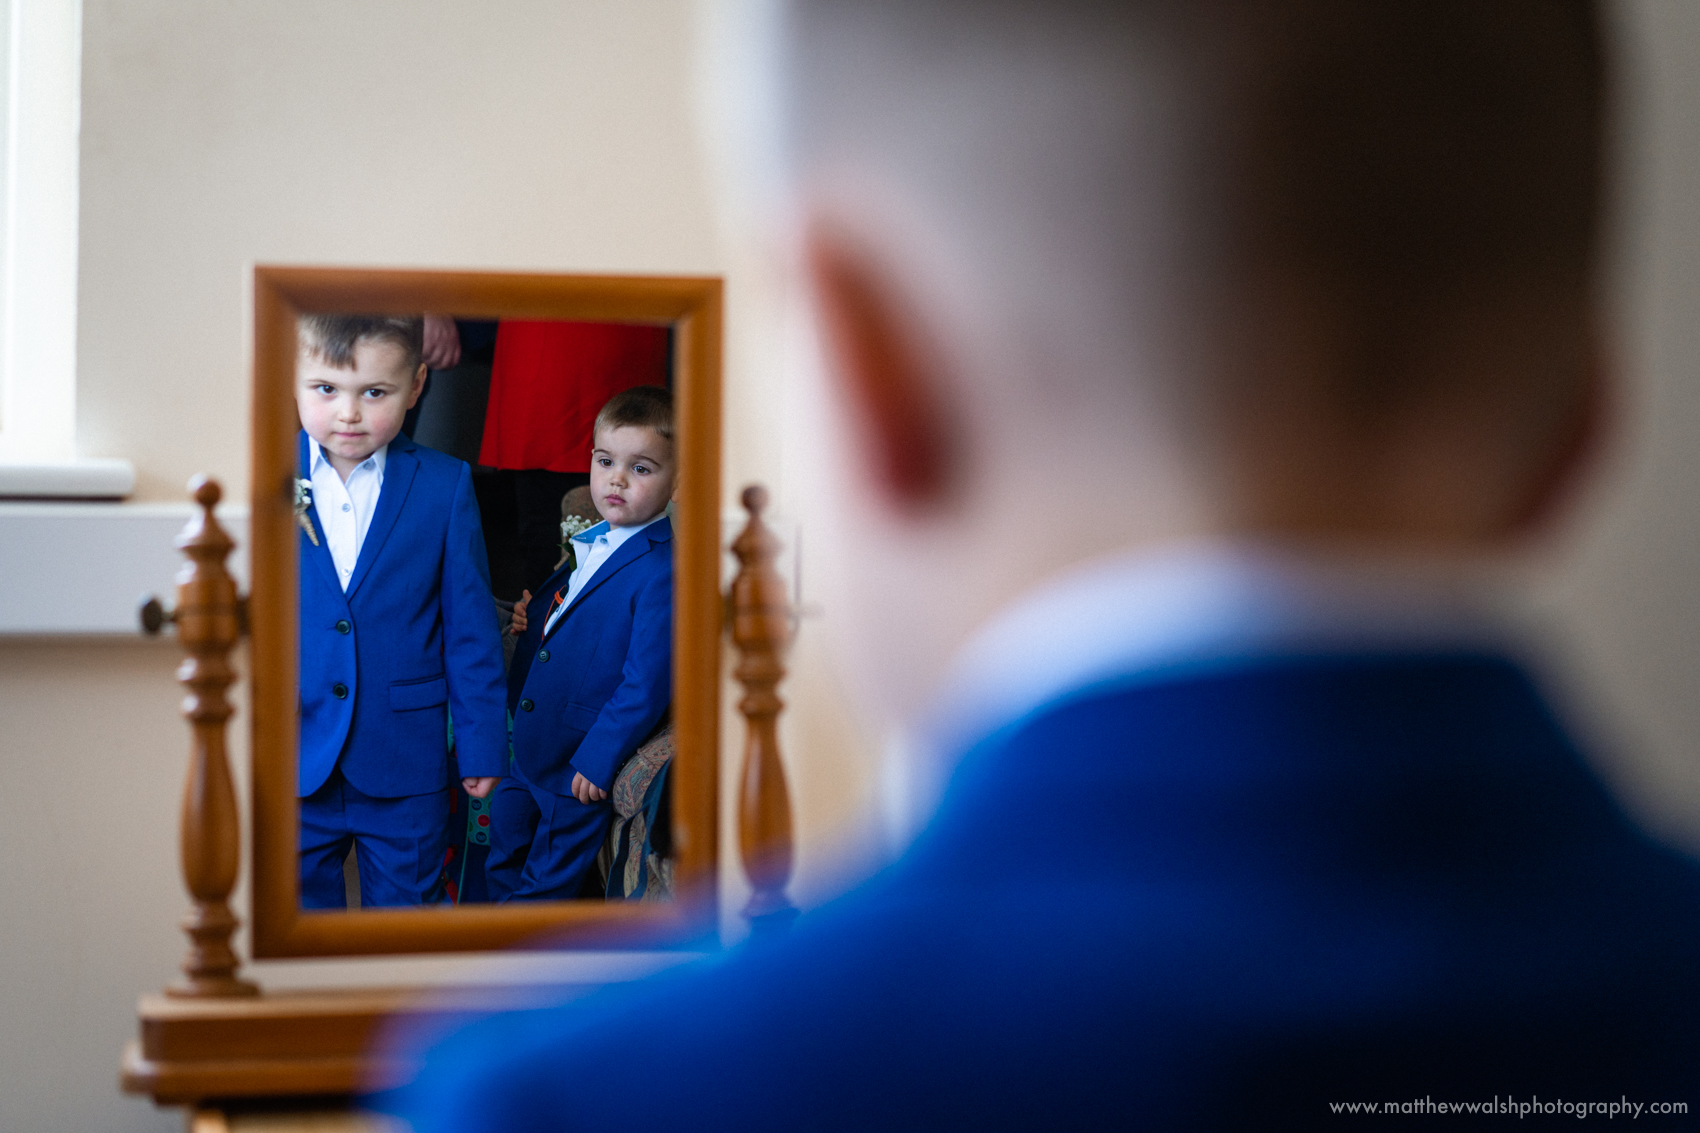 I love this image, depth created by the out of focus foreground and use of reflections to show the two boys together